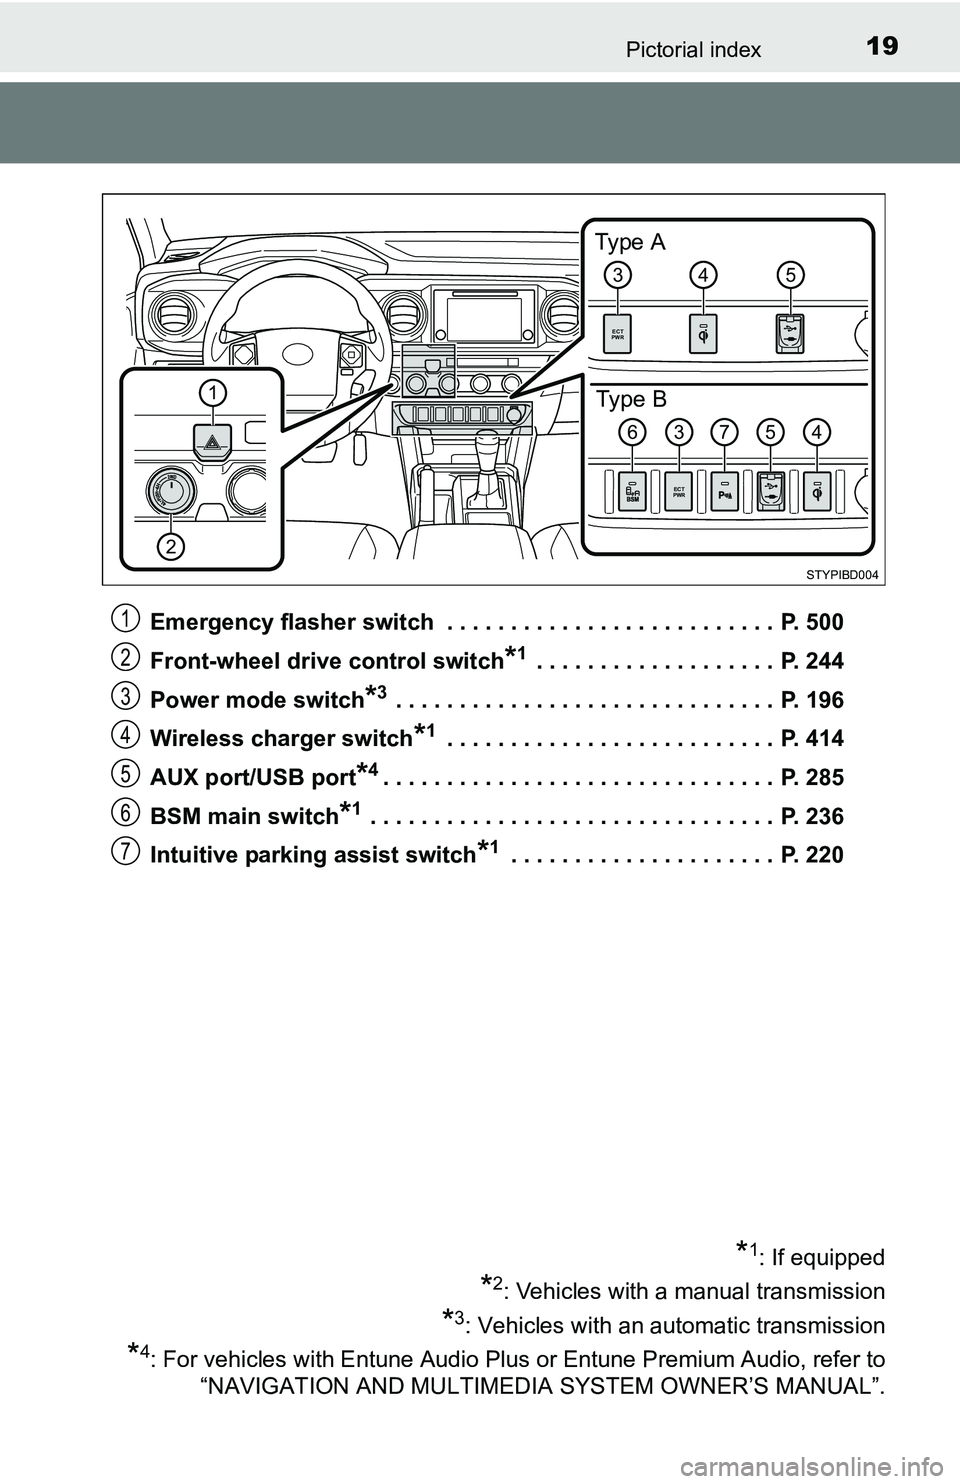 TOYOTA TACOMA 2016  Owners Manual (in English) 19Pictorial index
Emergency flasher switch  . . . . . . . . . . . . . . . . . . . . . . . . . .  P. 500
Front-wheel drive control switch
*1 . . . . . . . . . . . . . . . . . . .  P. 244
Power mode swi